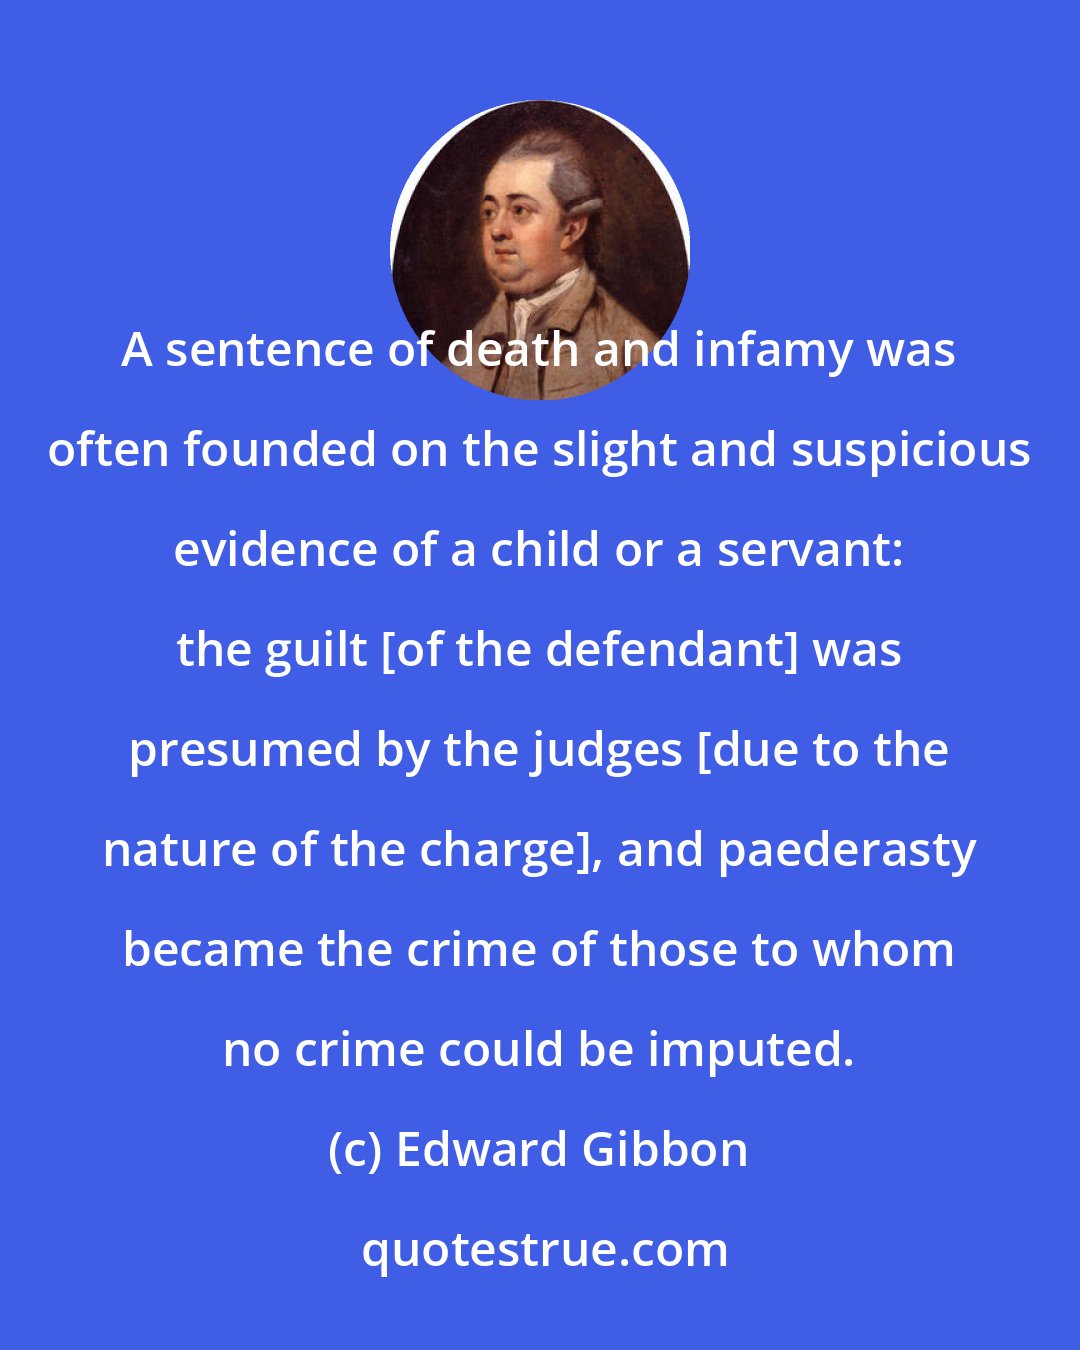 Edward Gibbon: A sentence of death and infamy was often founded on the slight and suspicious evidence of a child or a servant: the guilt [of the defendant] was presumed by the judges [due to the nature of the charge], and paederasty became the crime of those to whom no crime could be imputed.